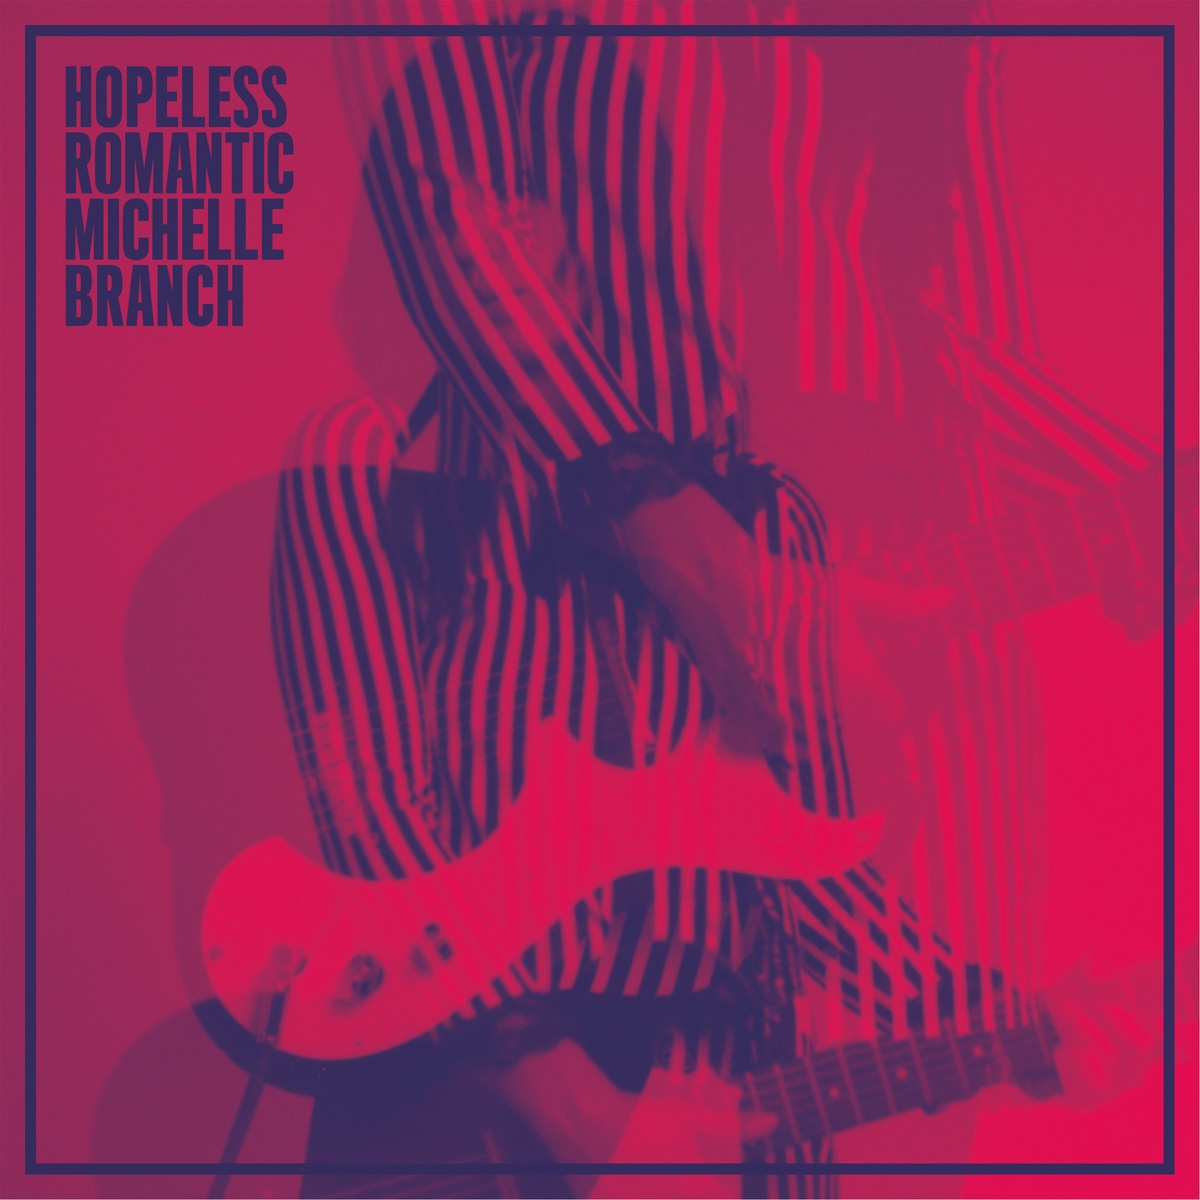 Hopeless Romantic Album Cover By Michelle Branch